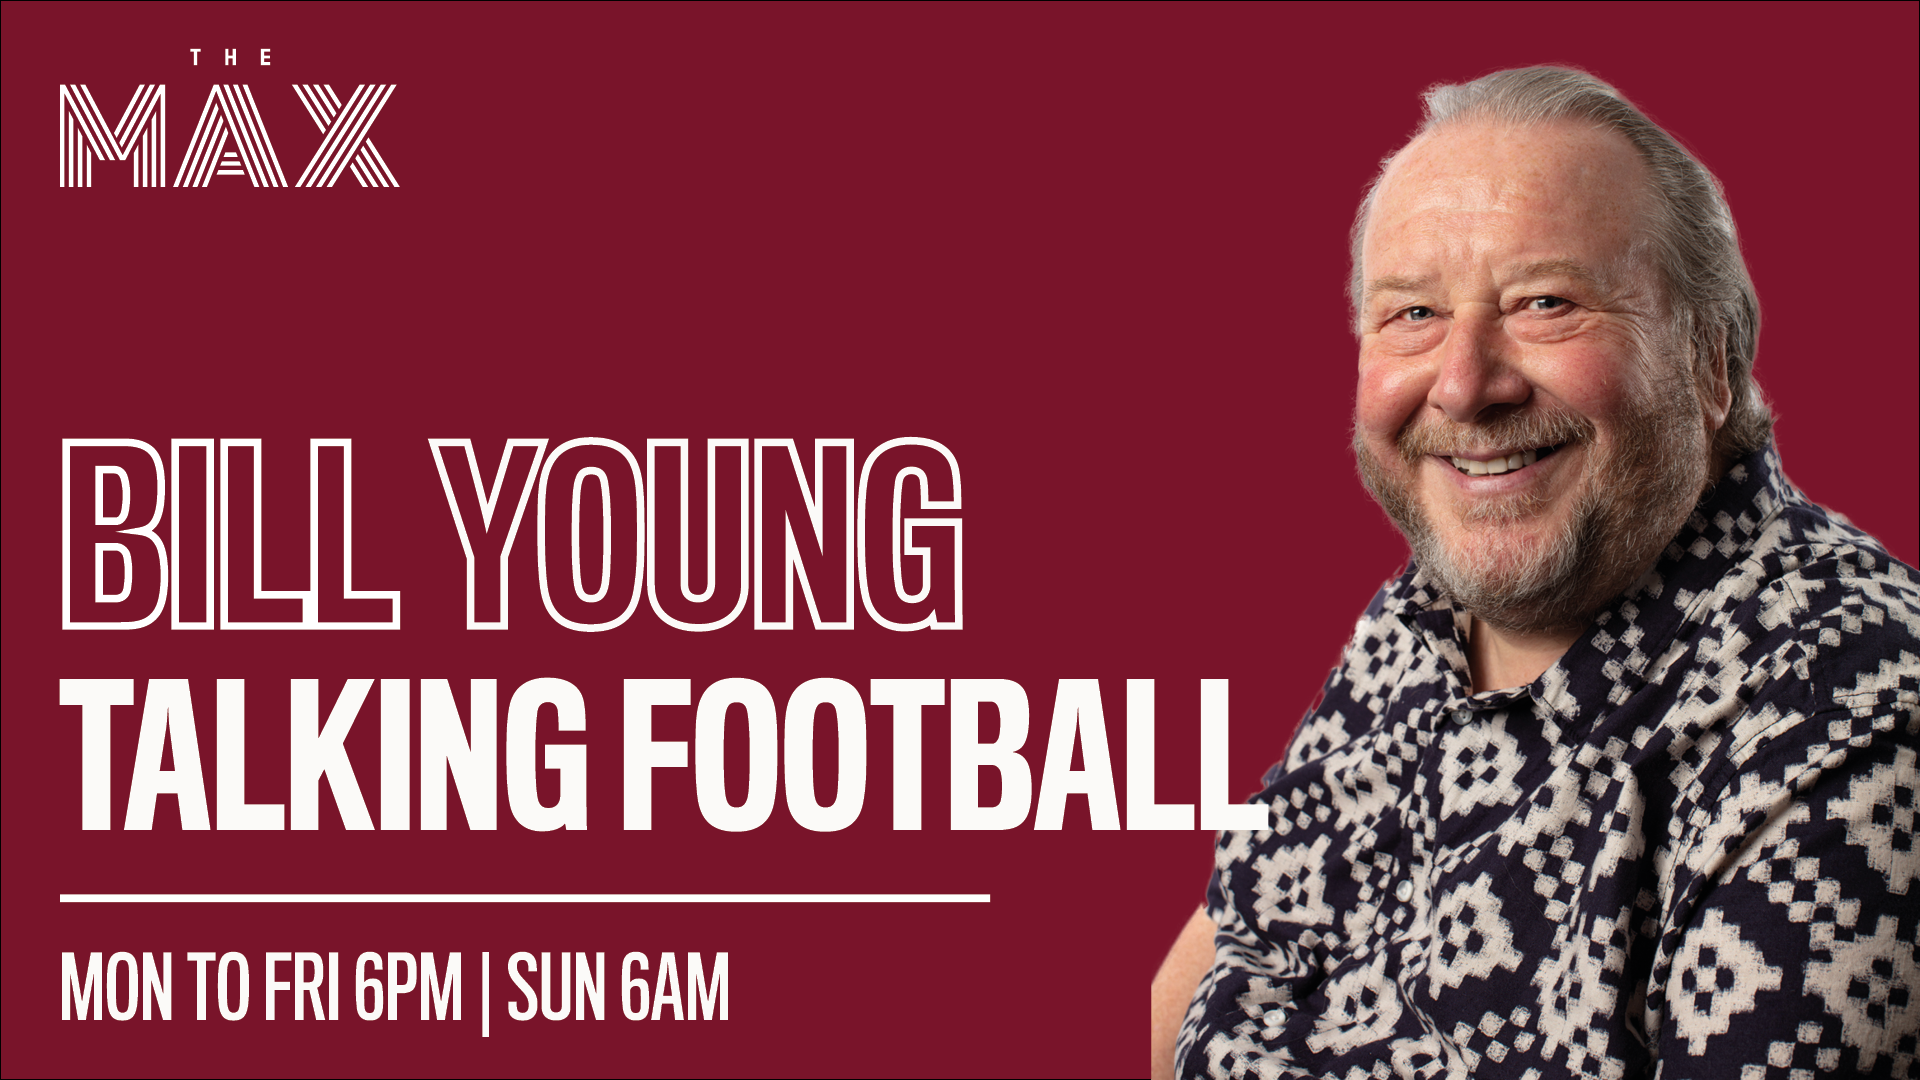 Talking Football with Bill Young Monday 3rd May